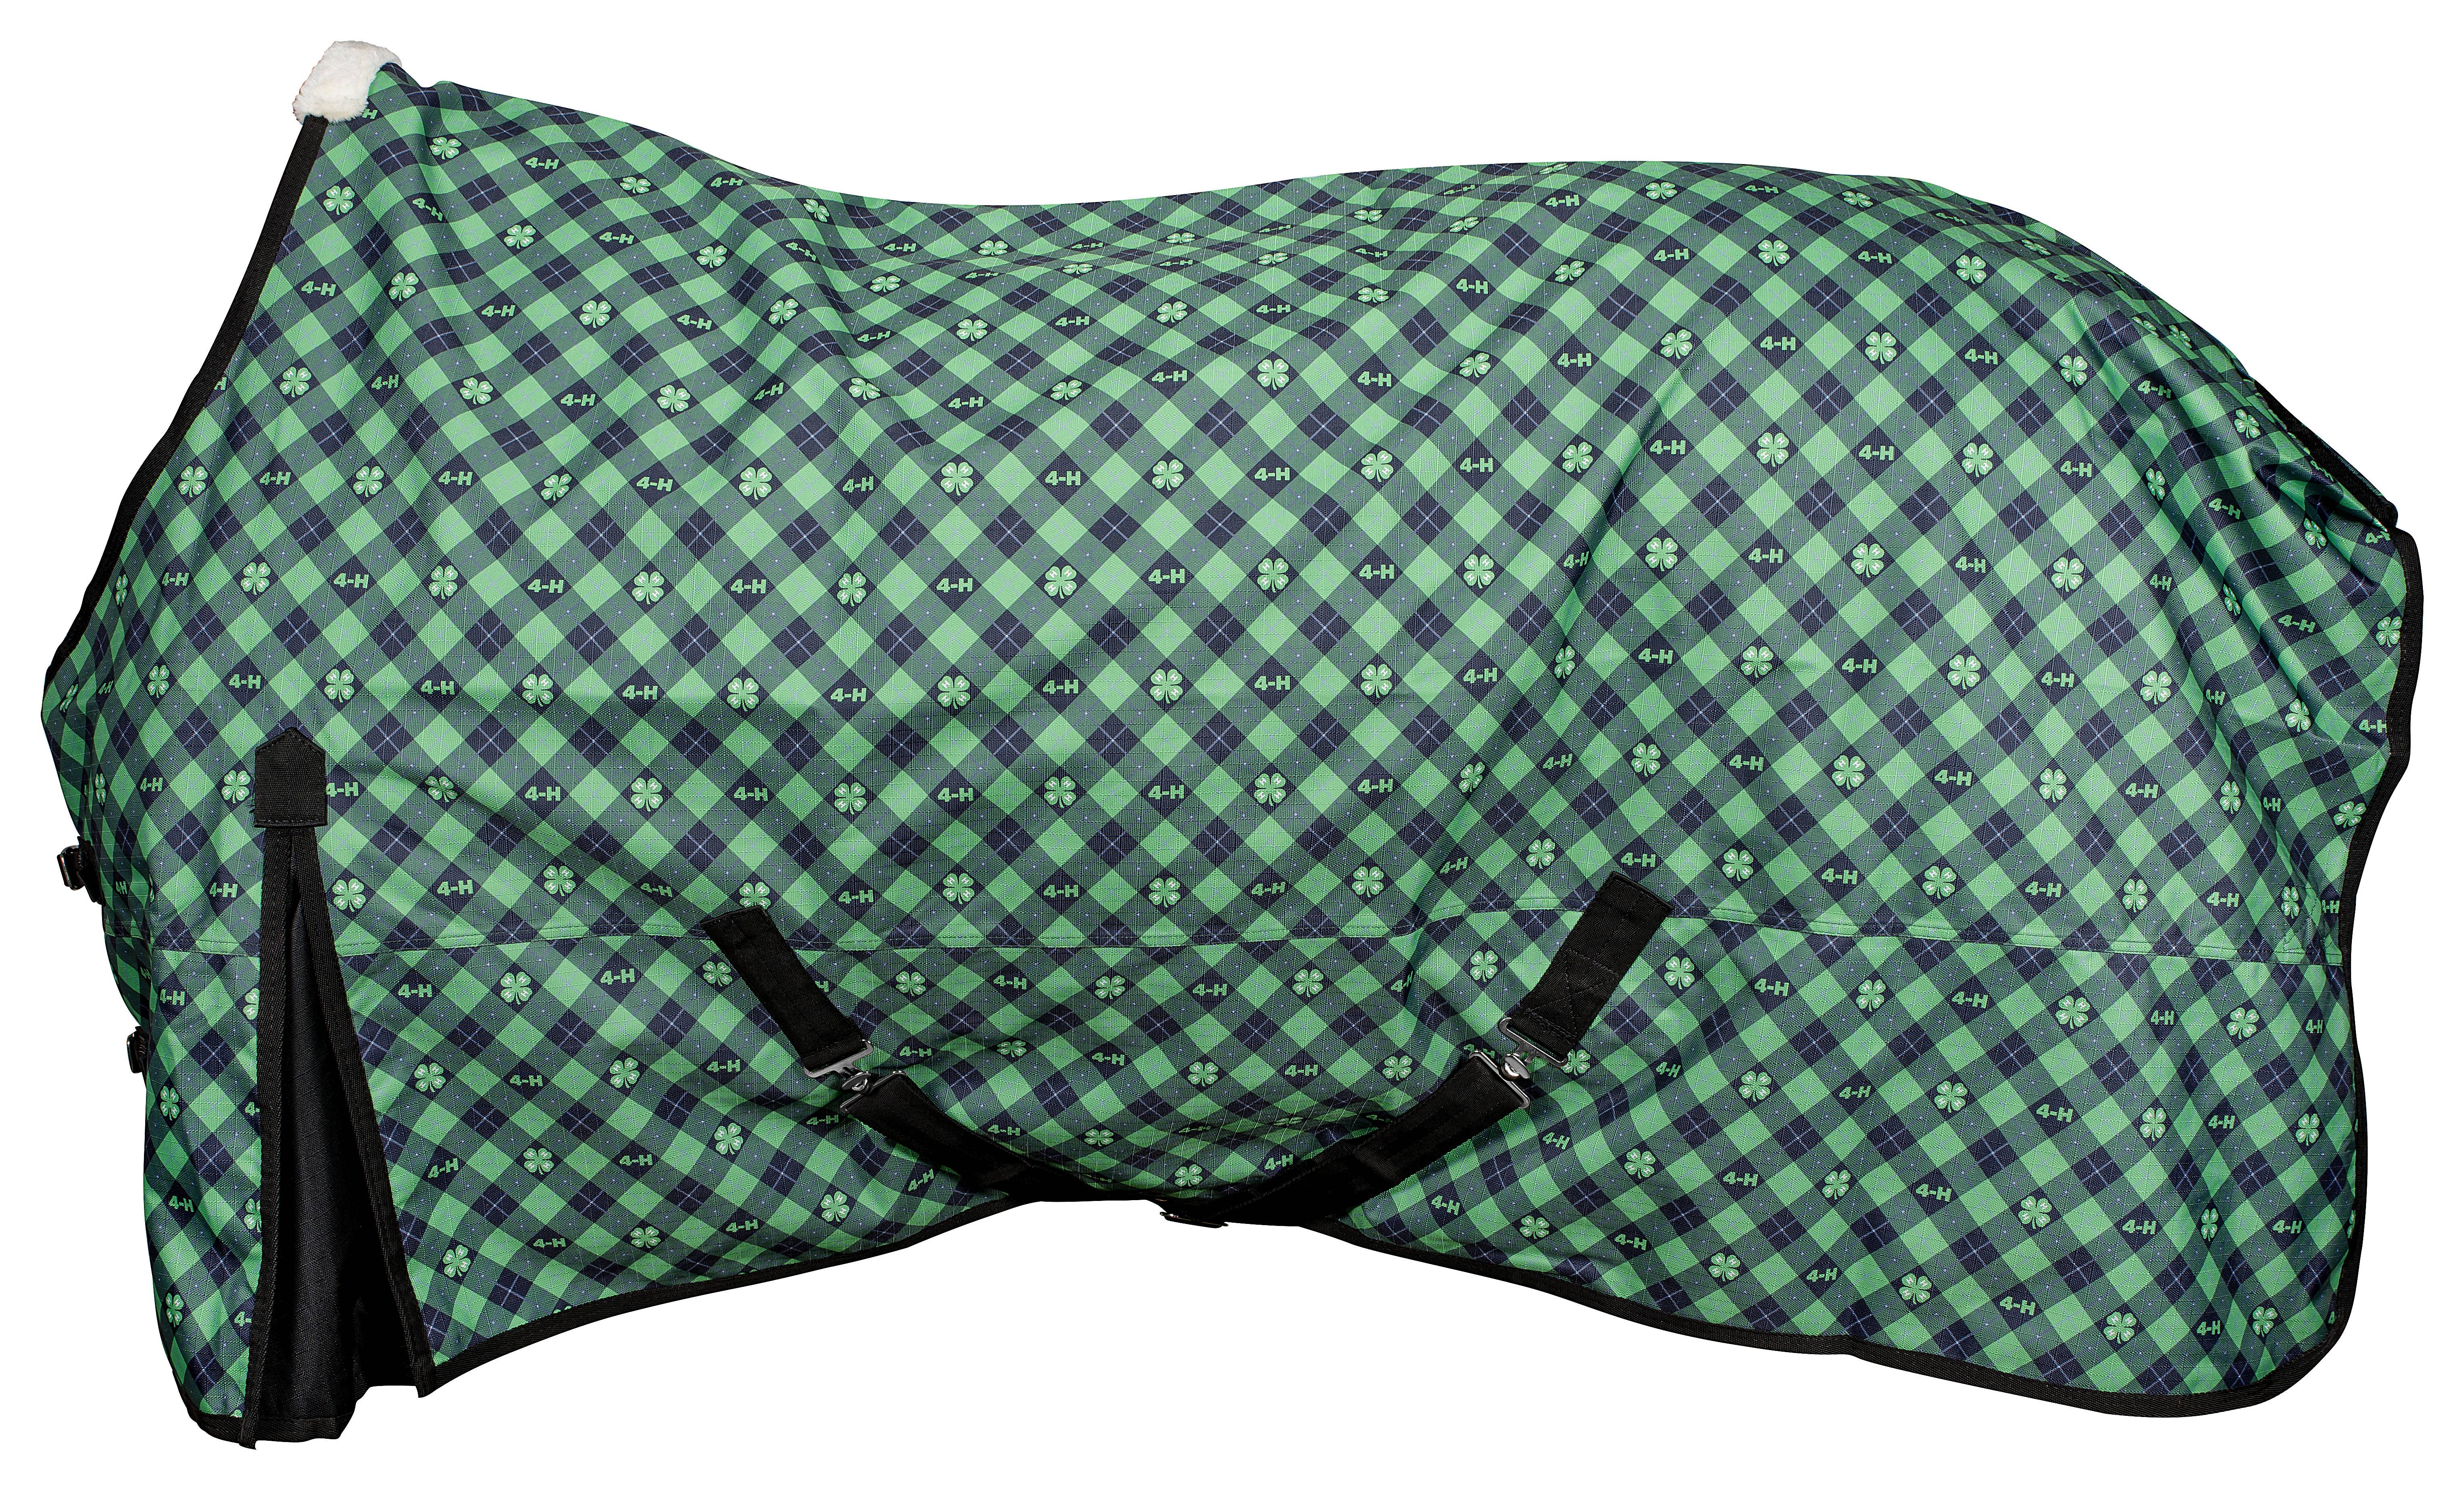 4-H Mid Weight Turnout Blanket